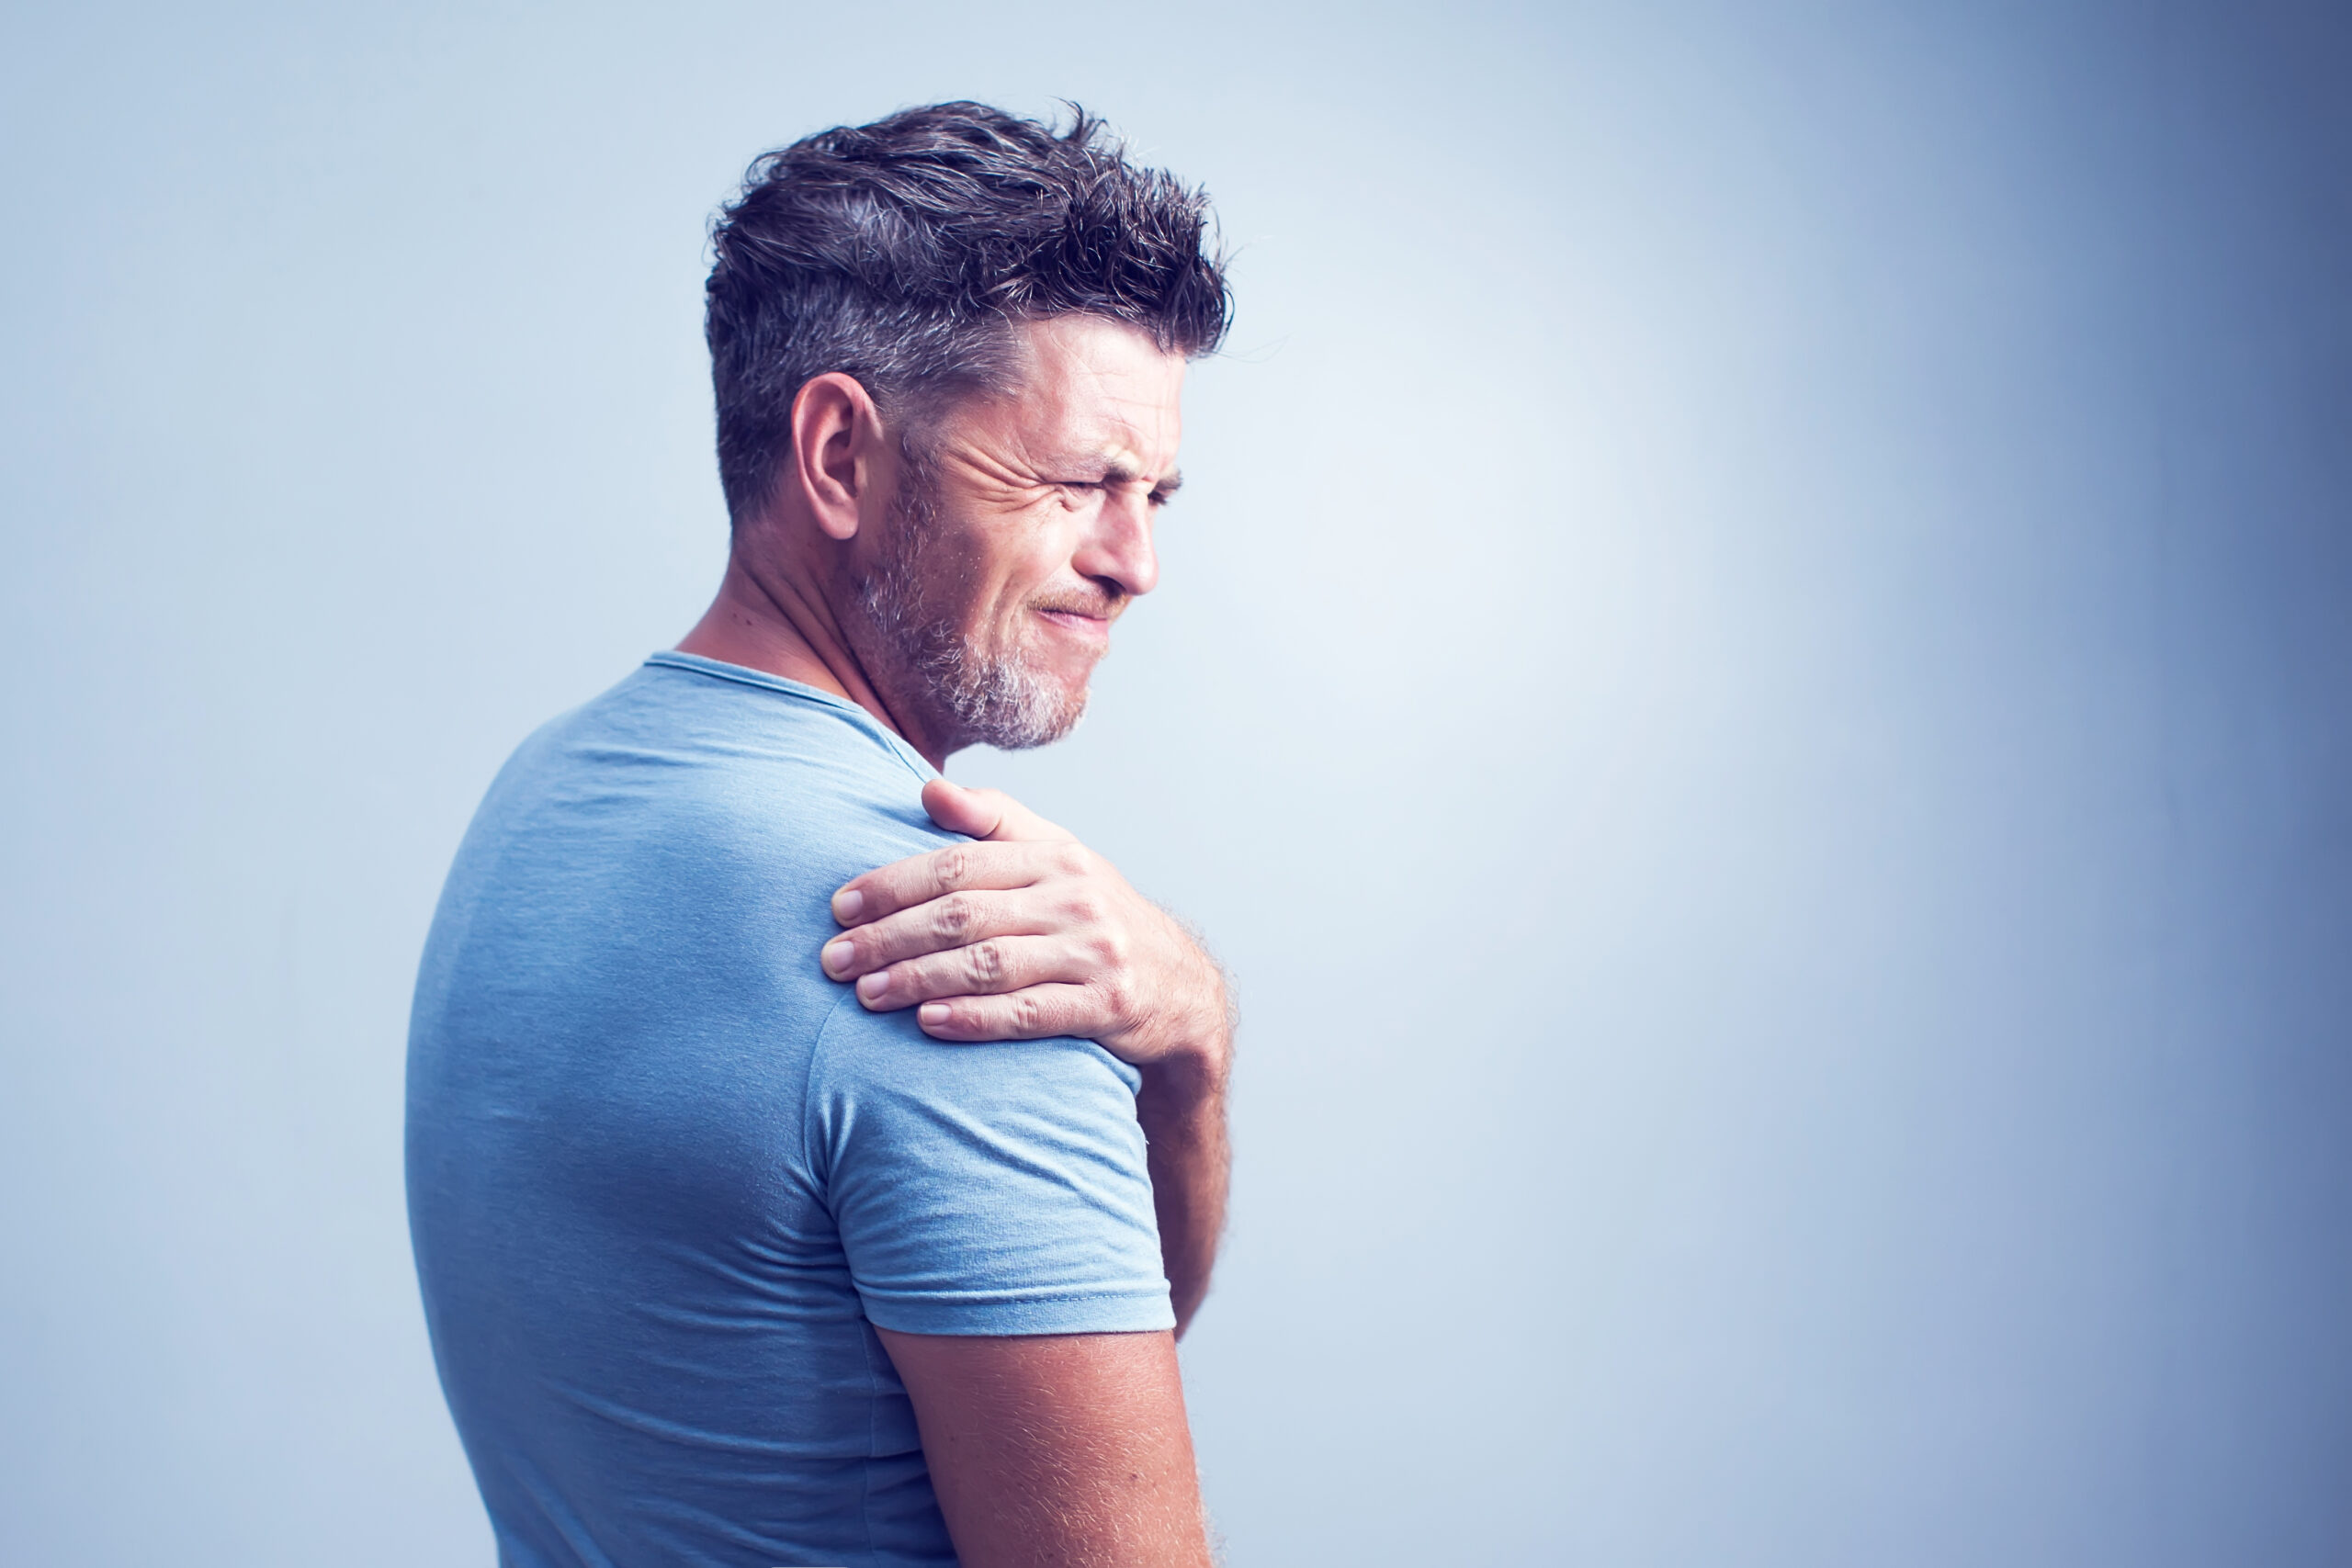 5 facts about low back pain in the workplace that you can’t ignore